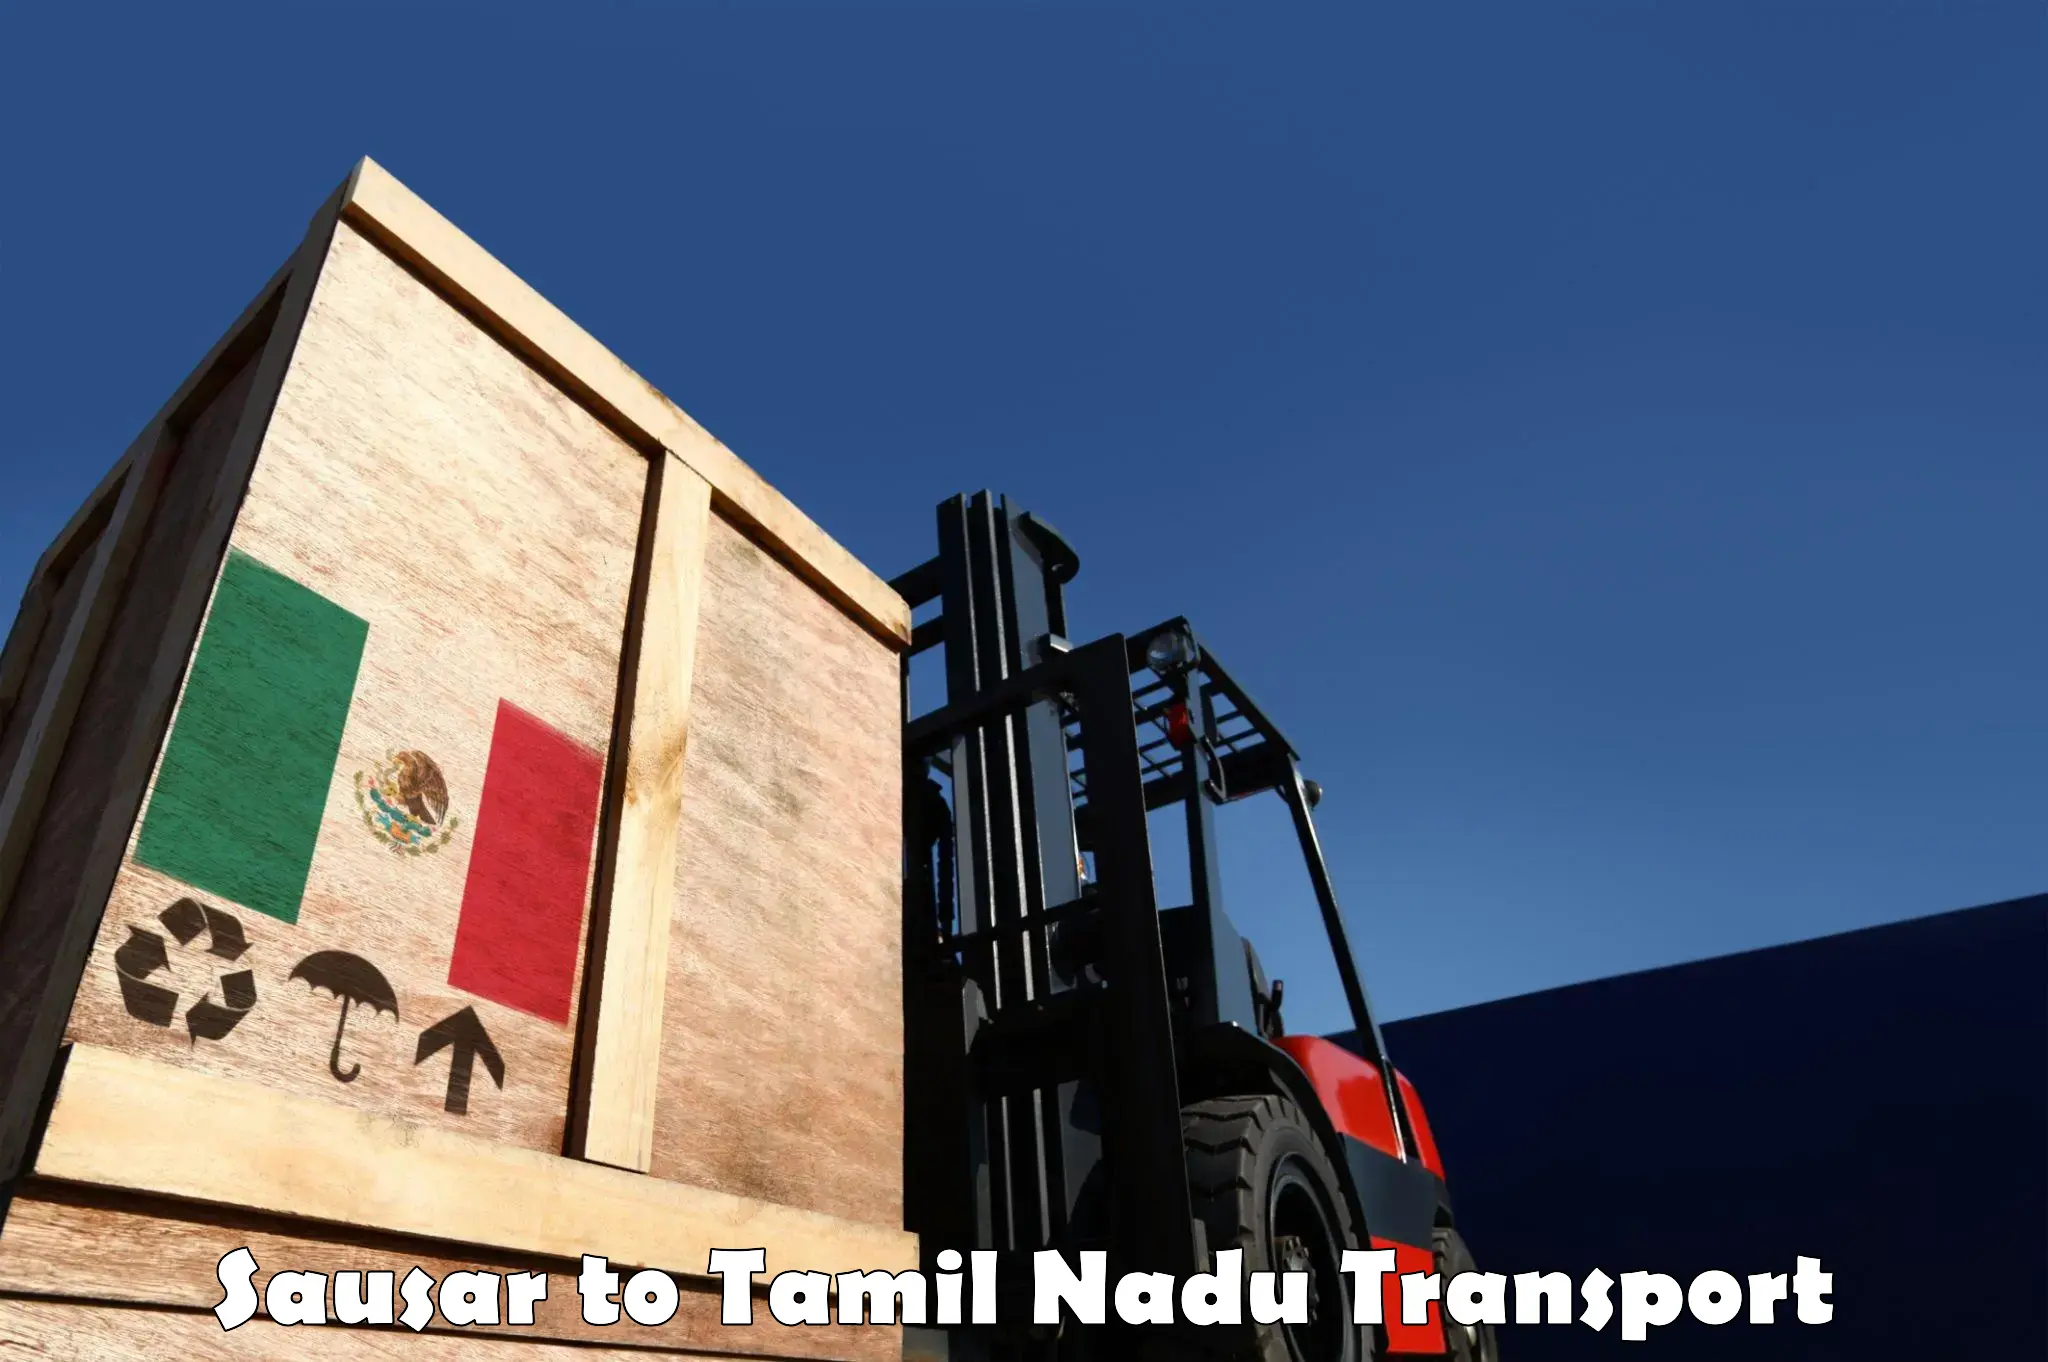 Nationwide transport services Sausar to Hosur